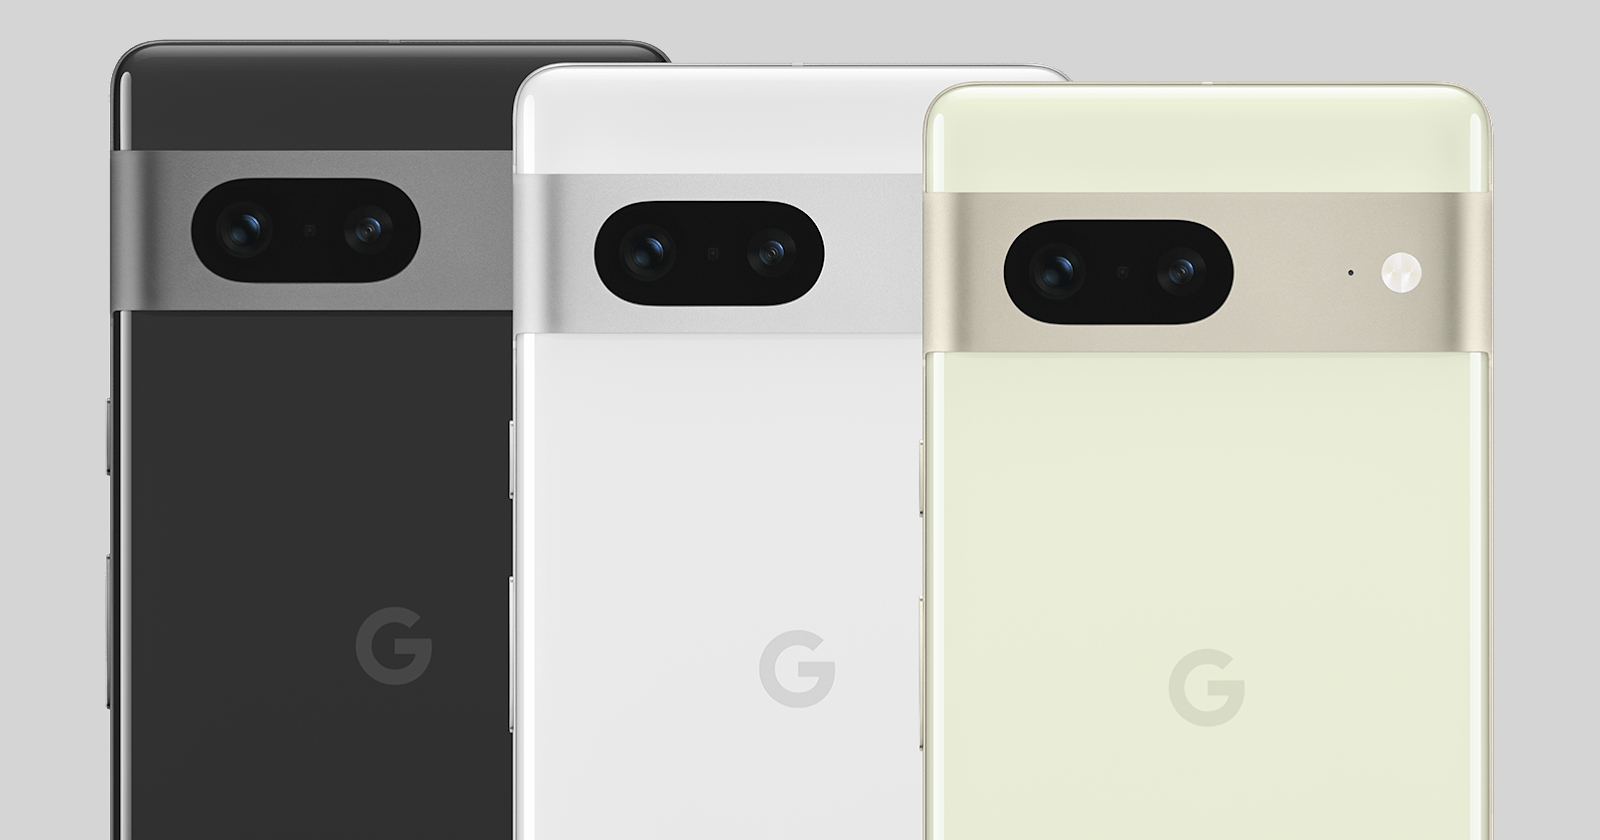 Here's Google Pixel price, availability details, and ongoing deals in Puerto Rico